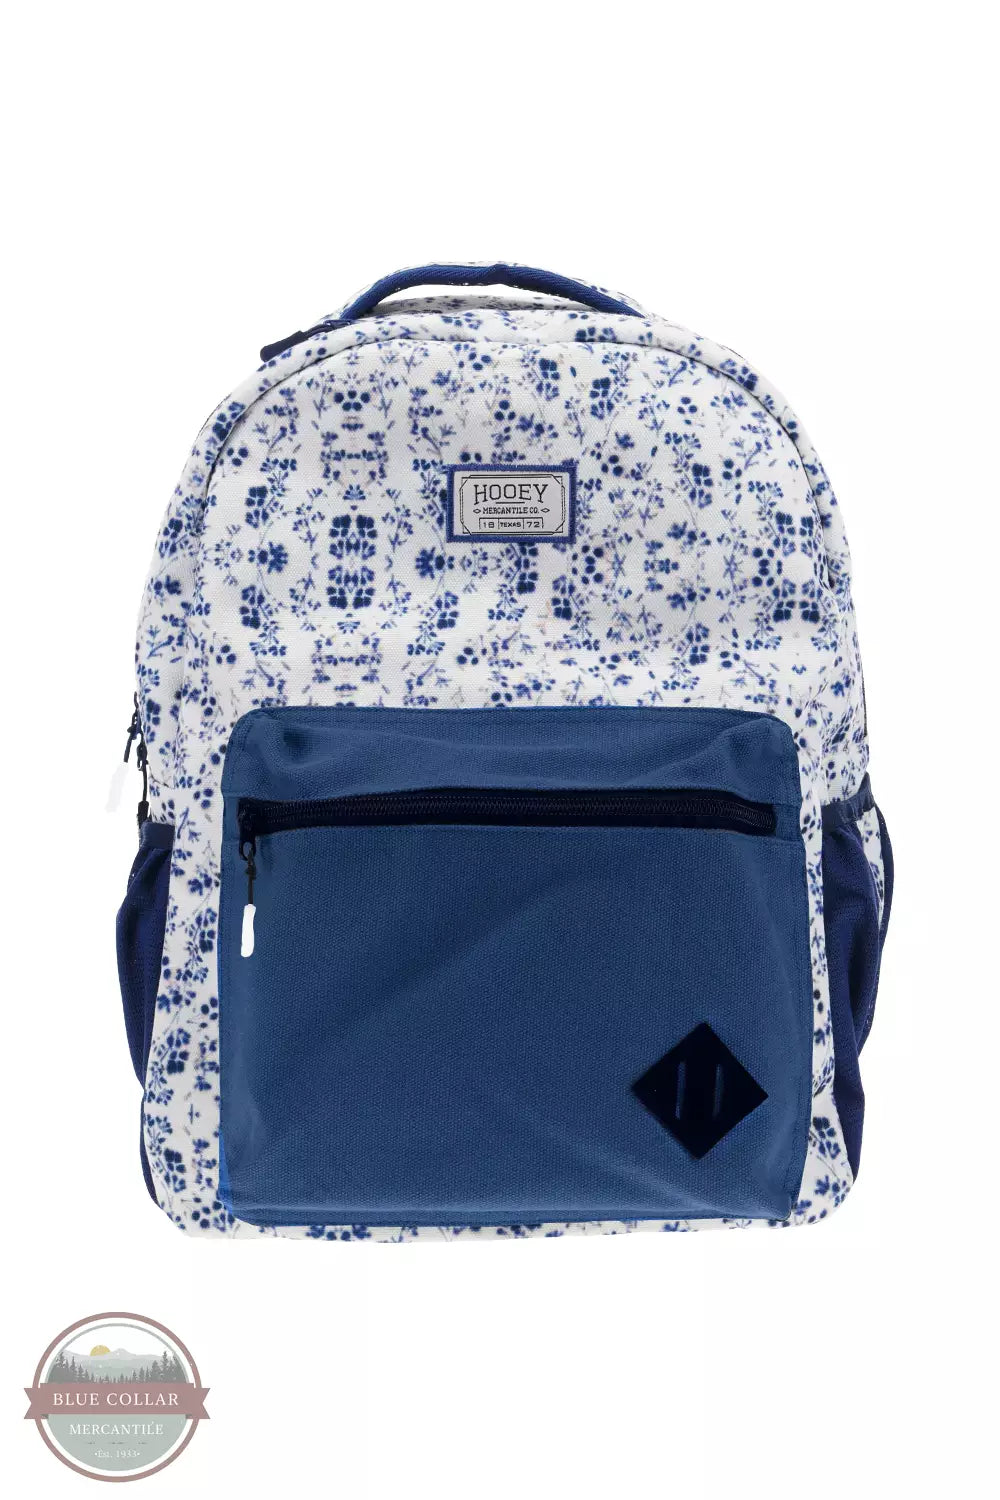 Hooey BP051WHNV Recess Backpack in White and Navy Floral and Black/White Accents Front View